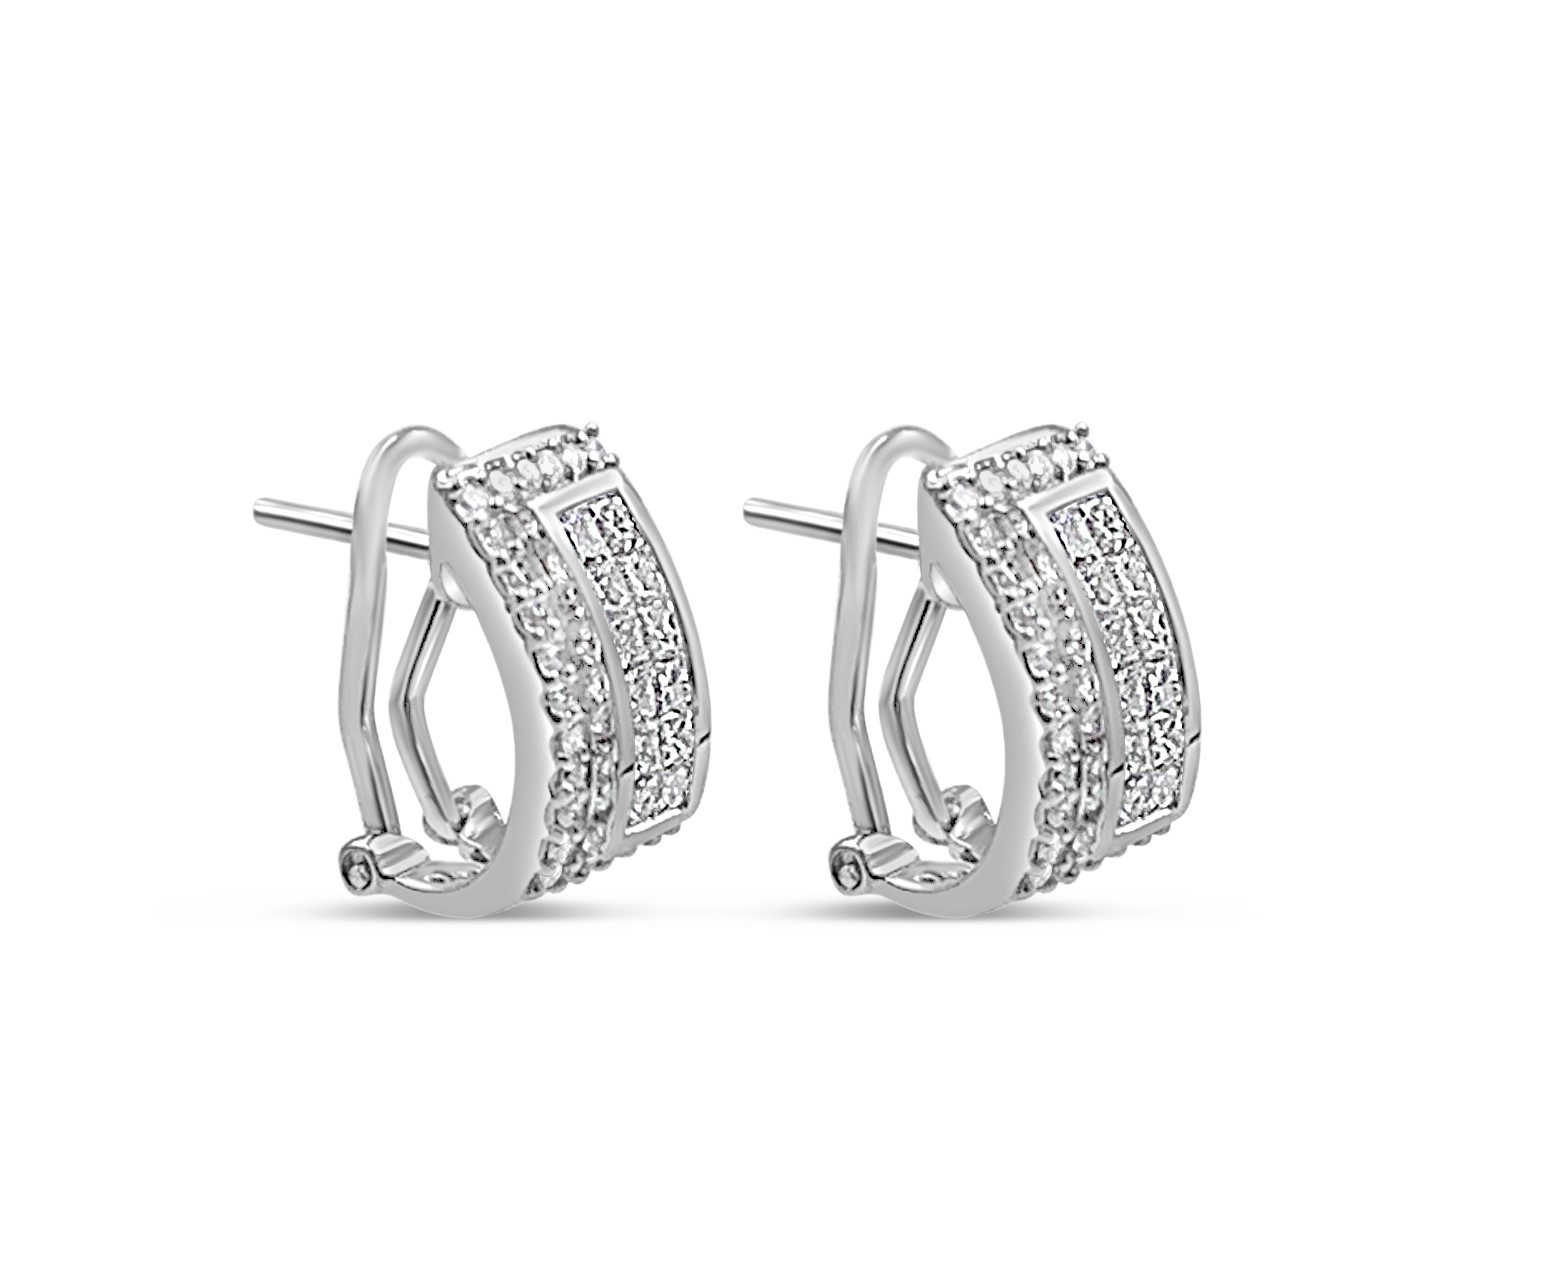 18k white gold earrings with 1,62ct diamonds